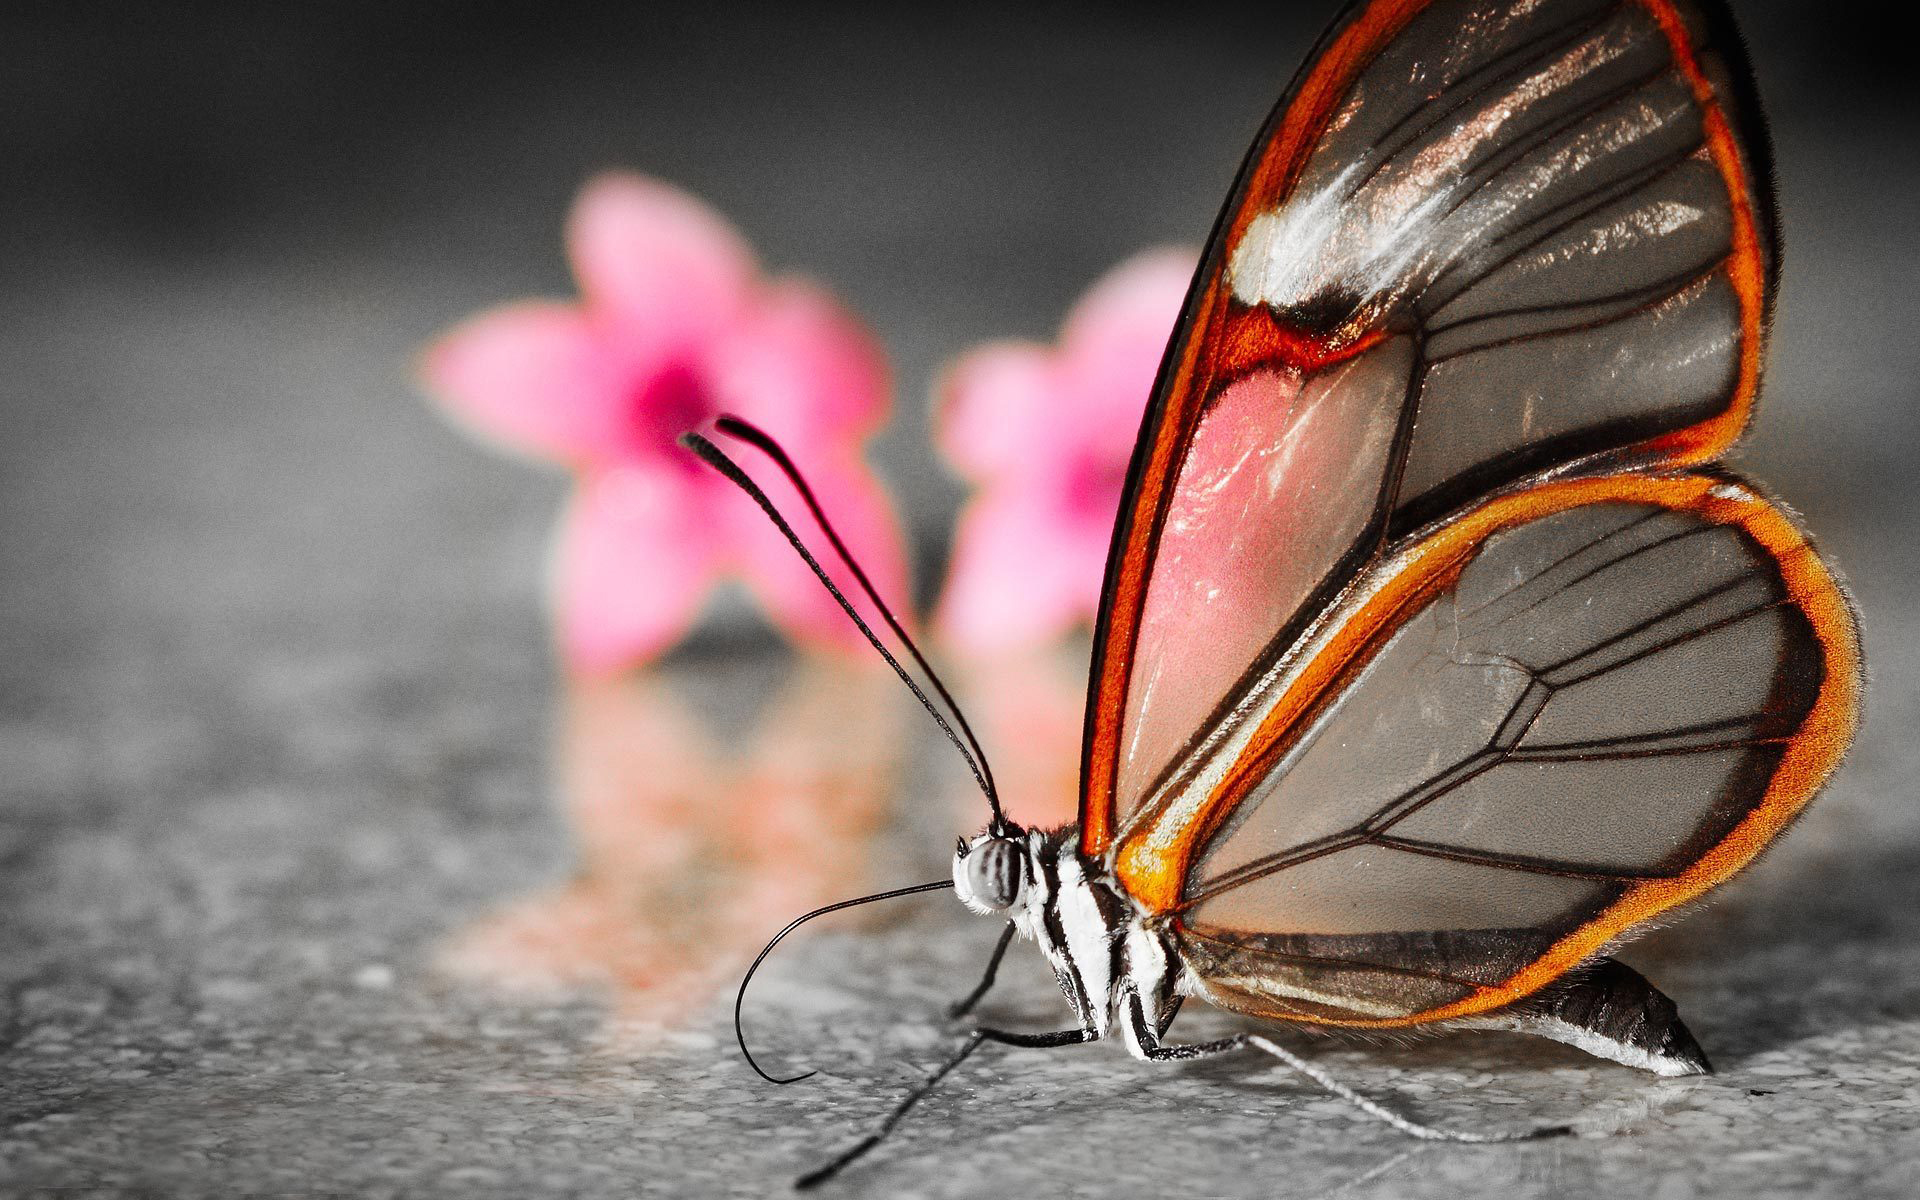 New Lock Screen Wallpapers butterflies, insects